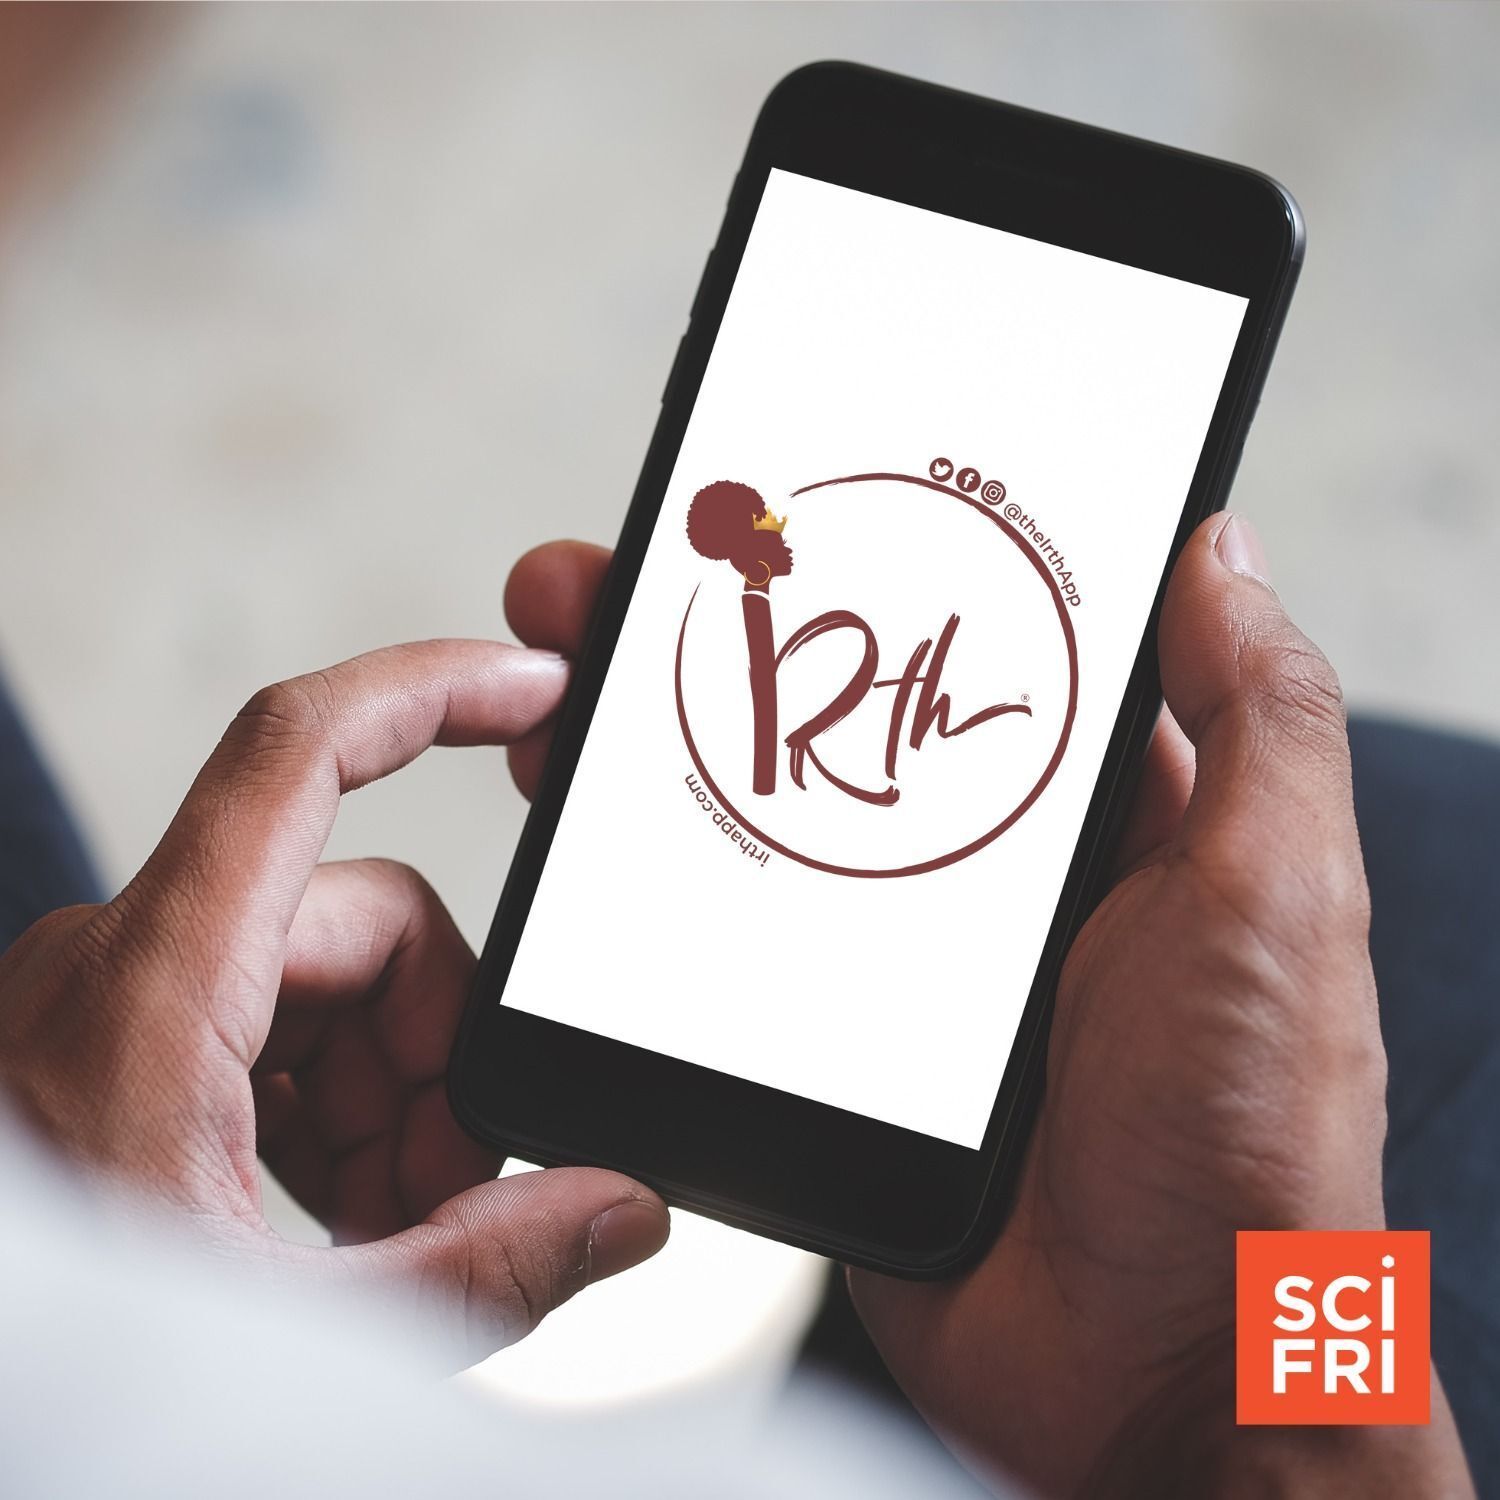 694: An App For People Of Color To Rate Their Birthing Experiences | How Different Animals See